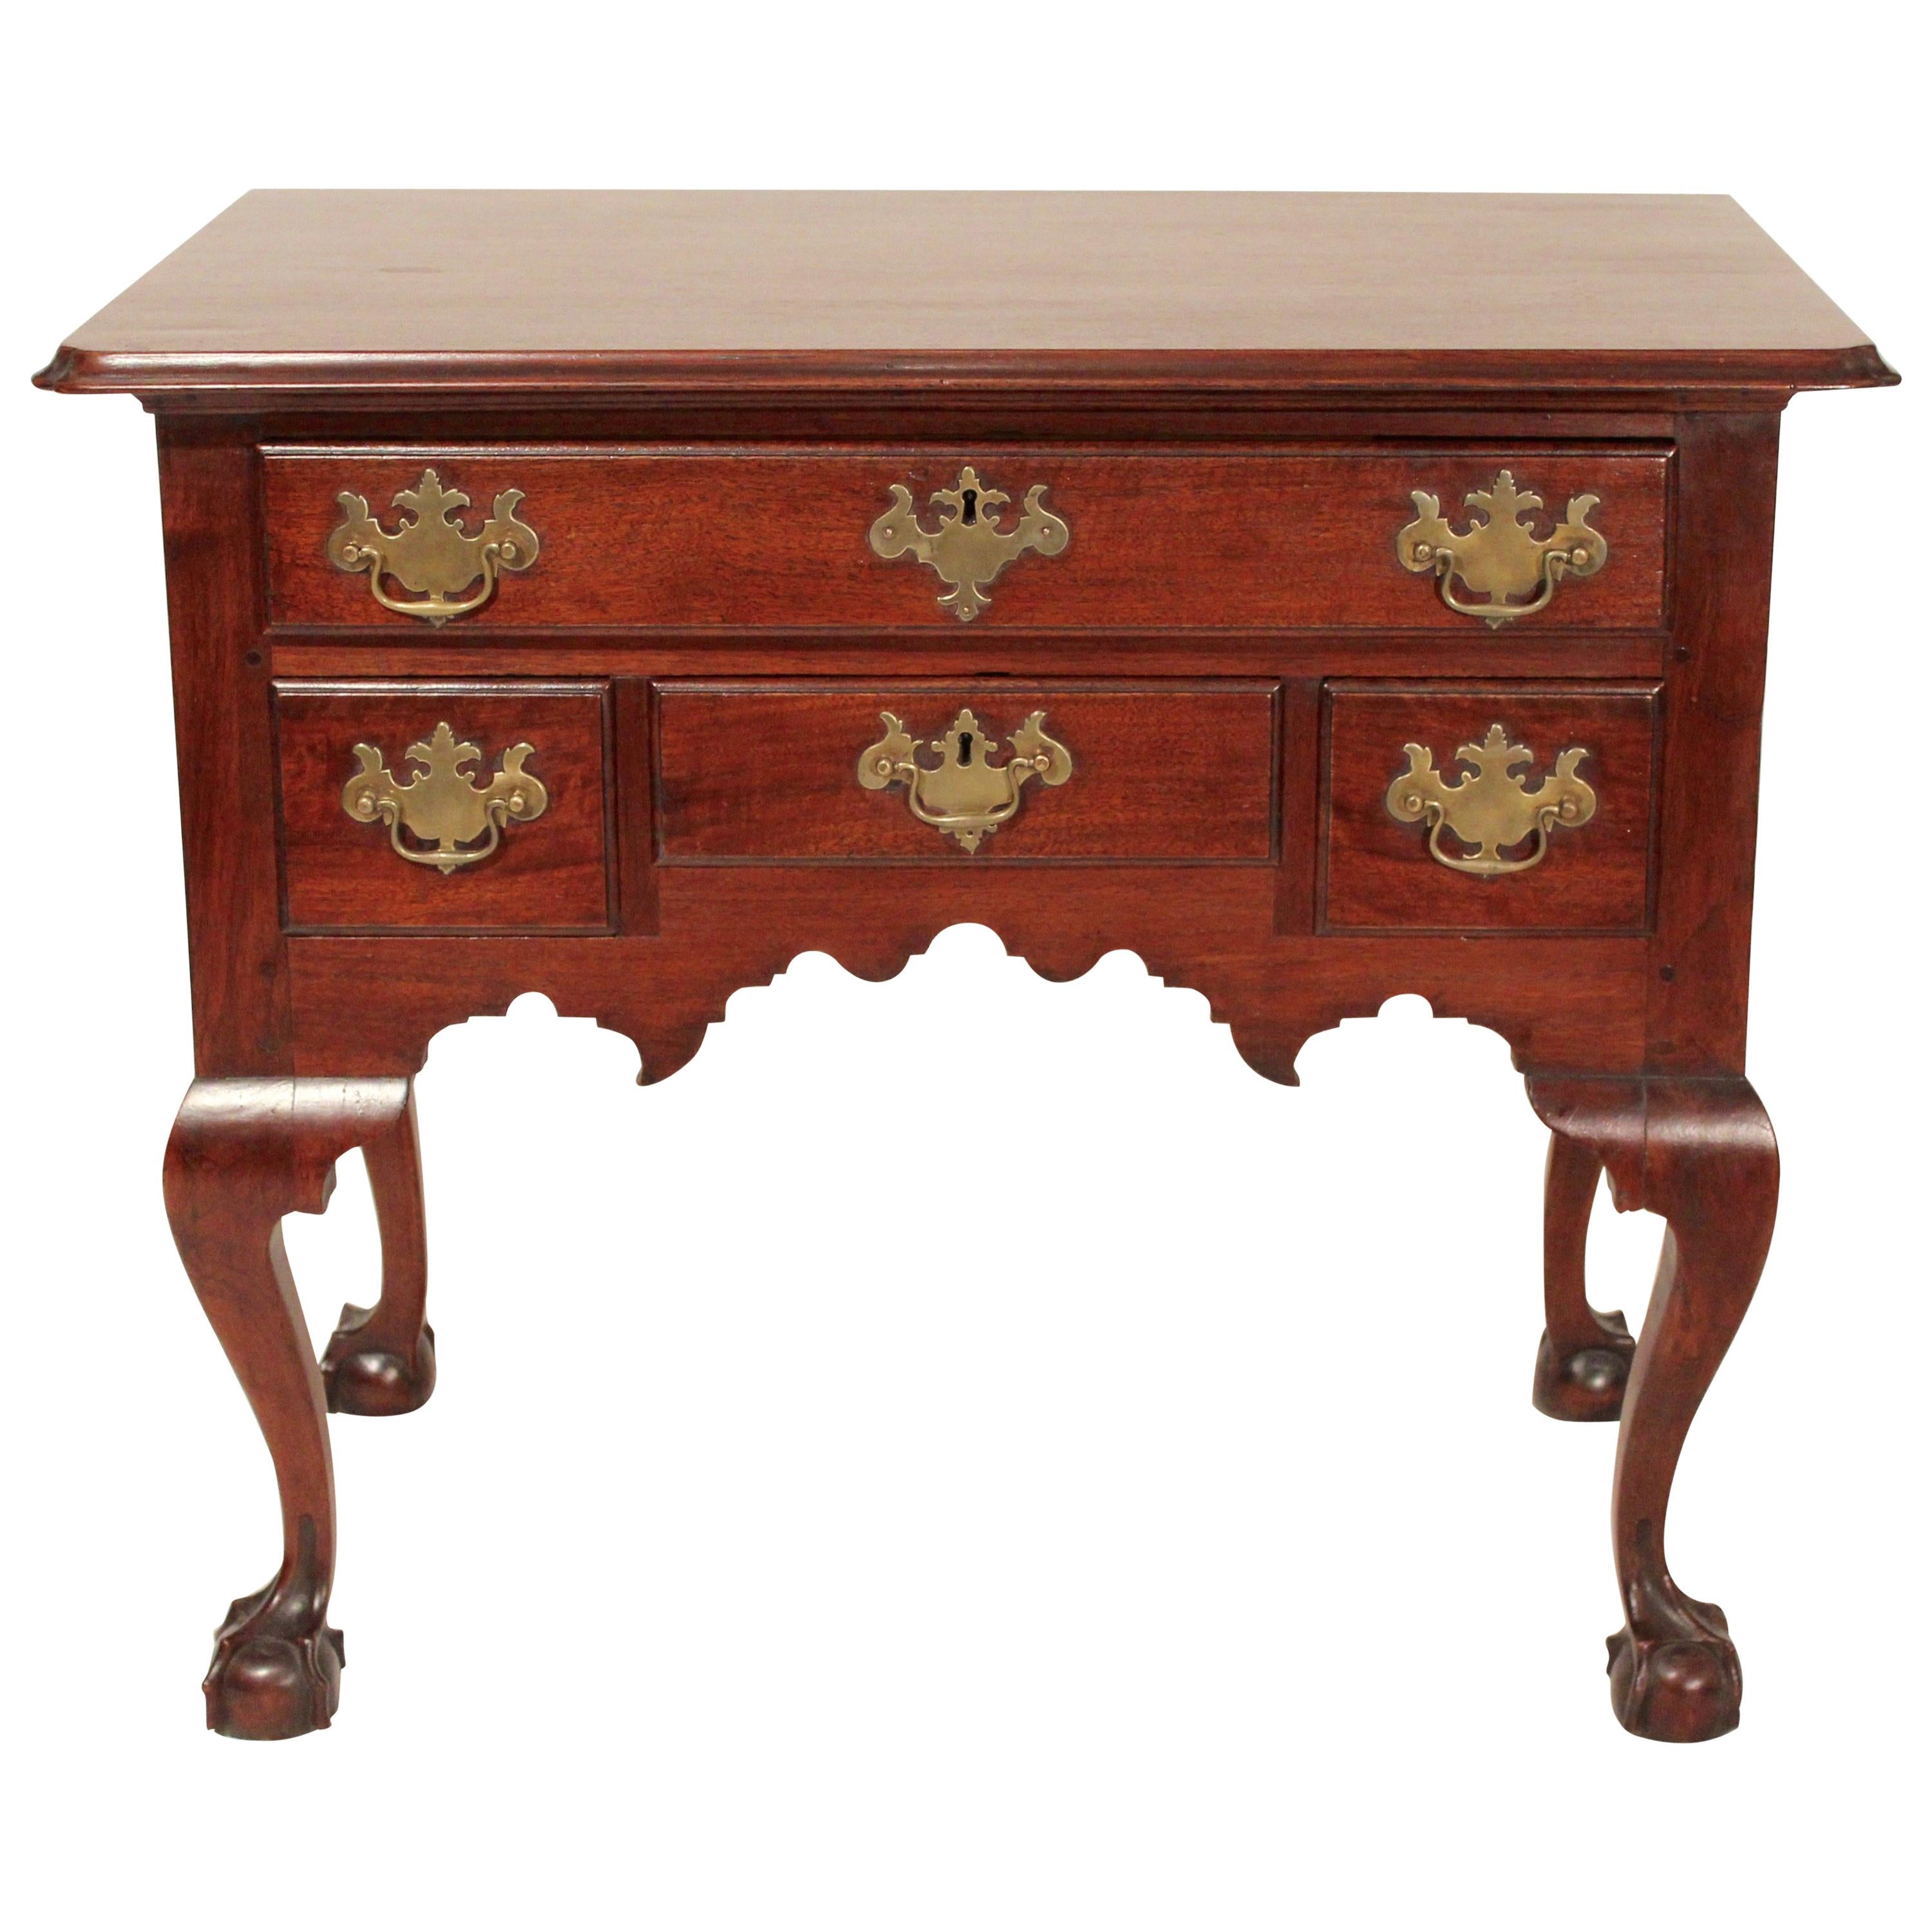 18th Century Chippendale Walnut Dressing Table